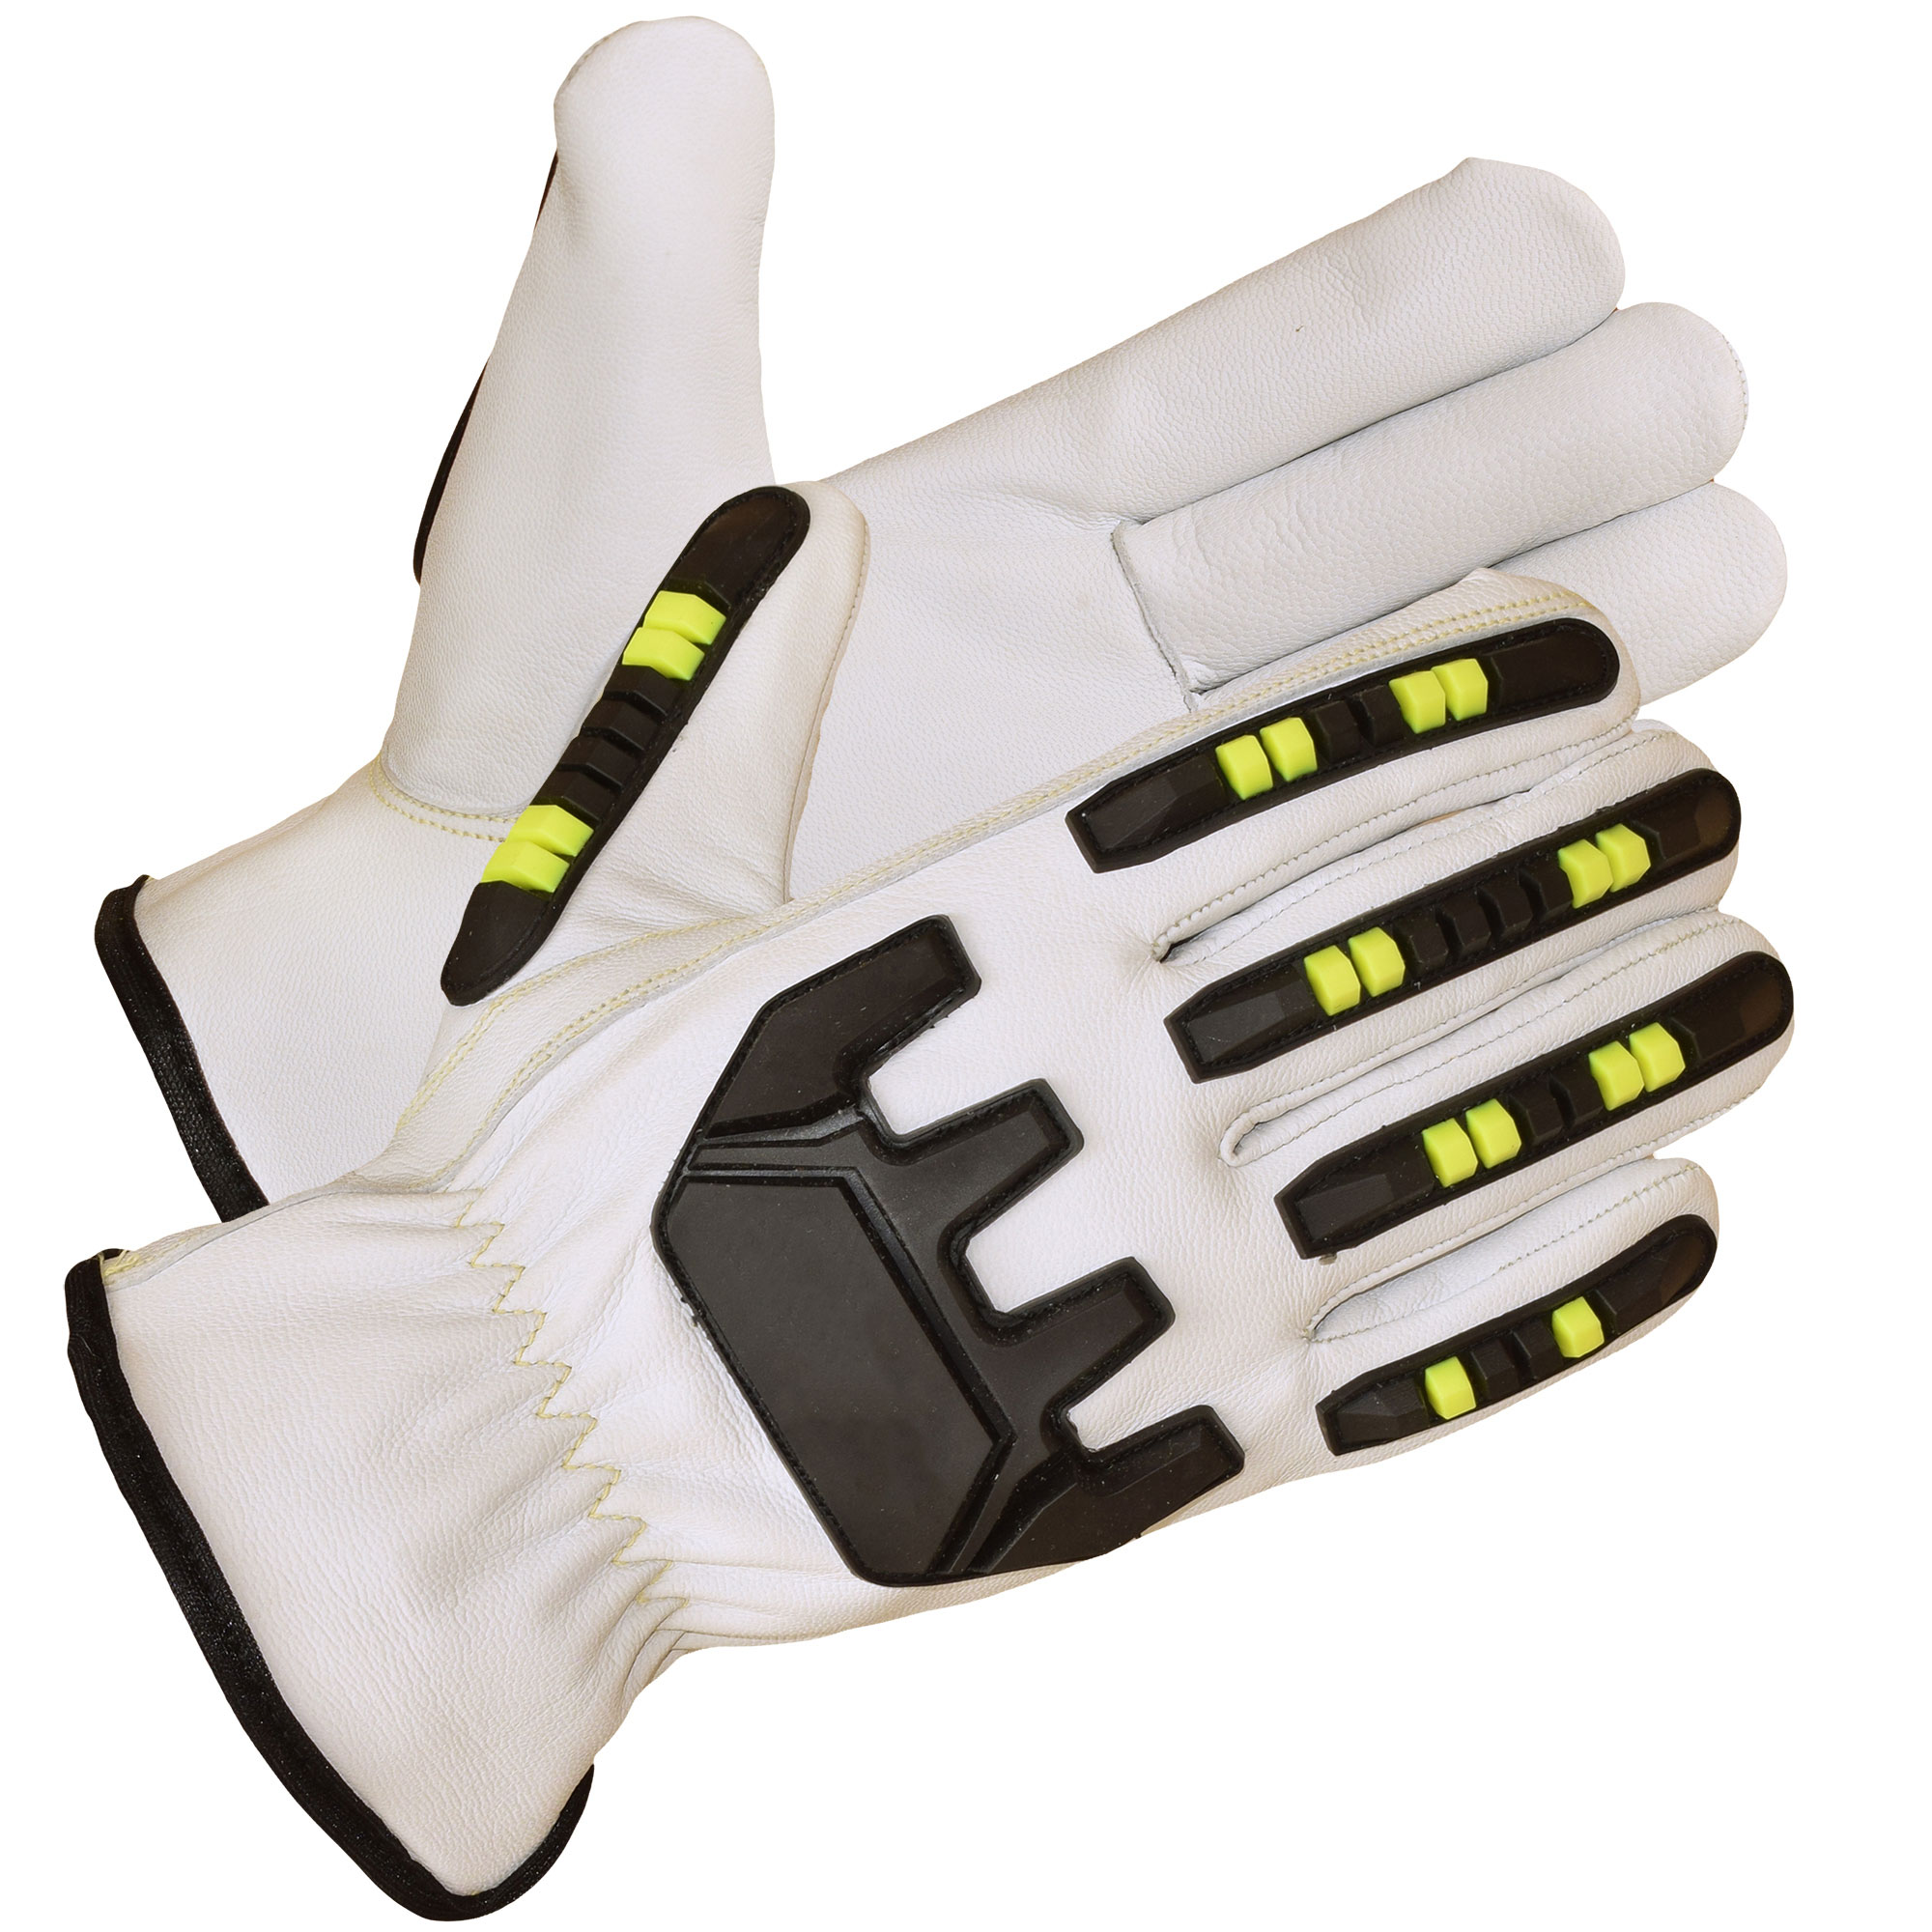 goat-grain-leather-glove-is-treated-with-oil-block-chemicals